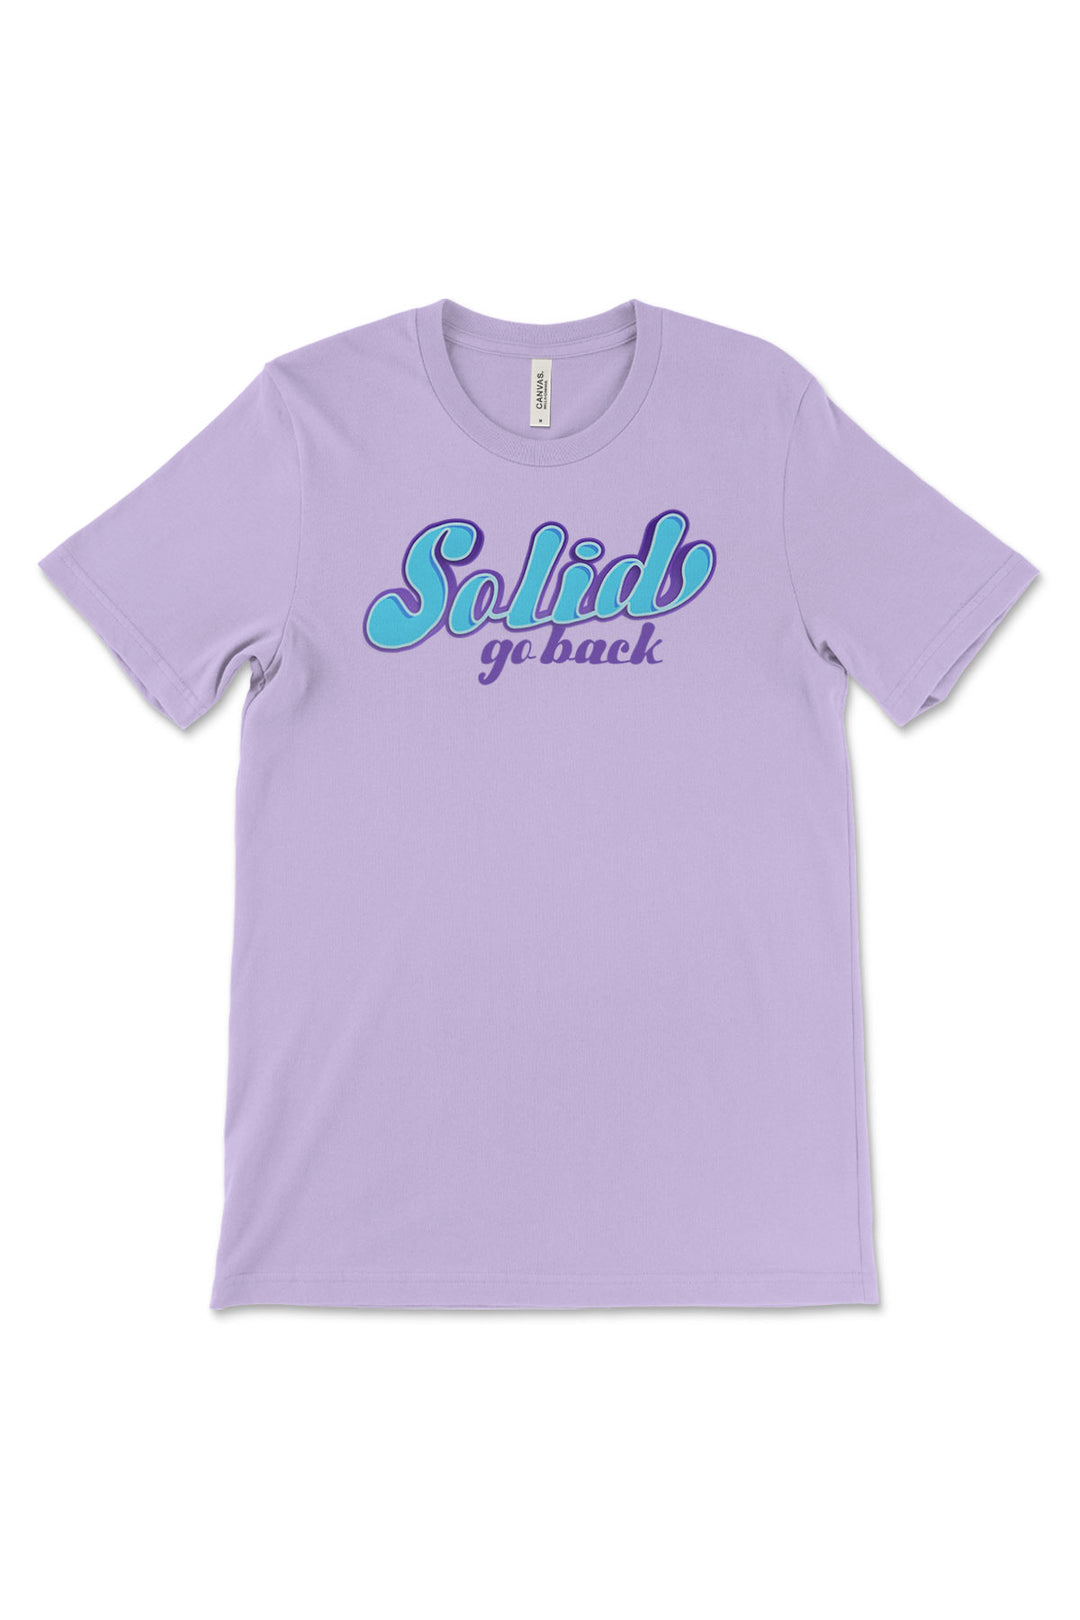 Jersey Tee - Solid Go Back